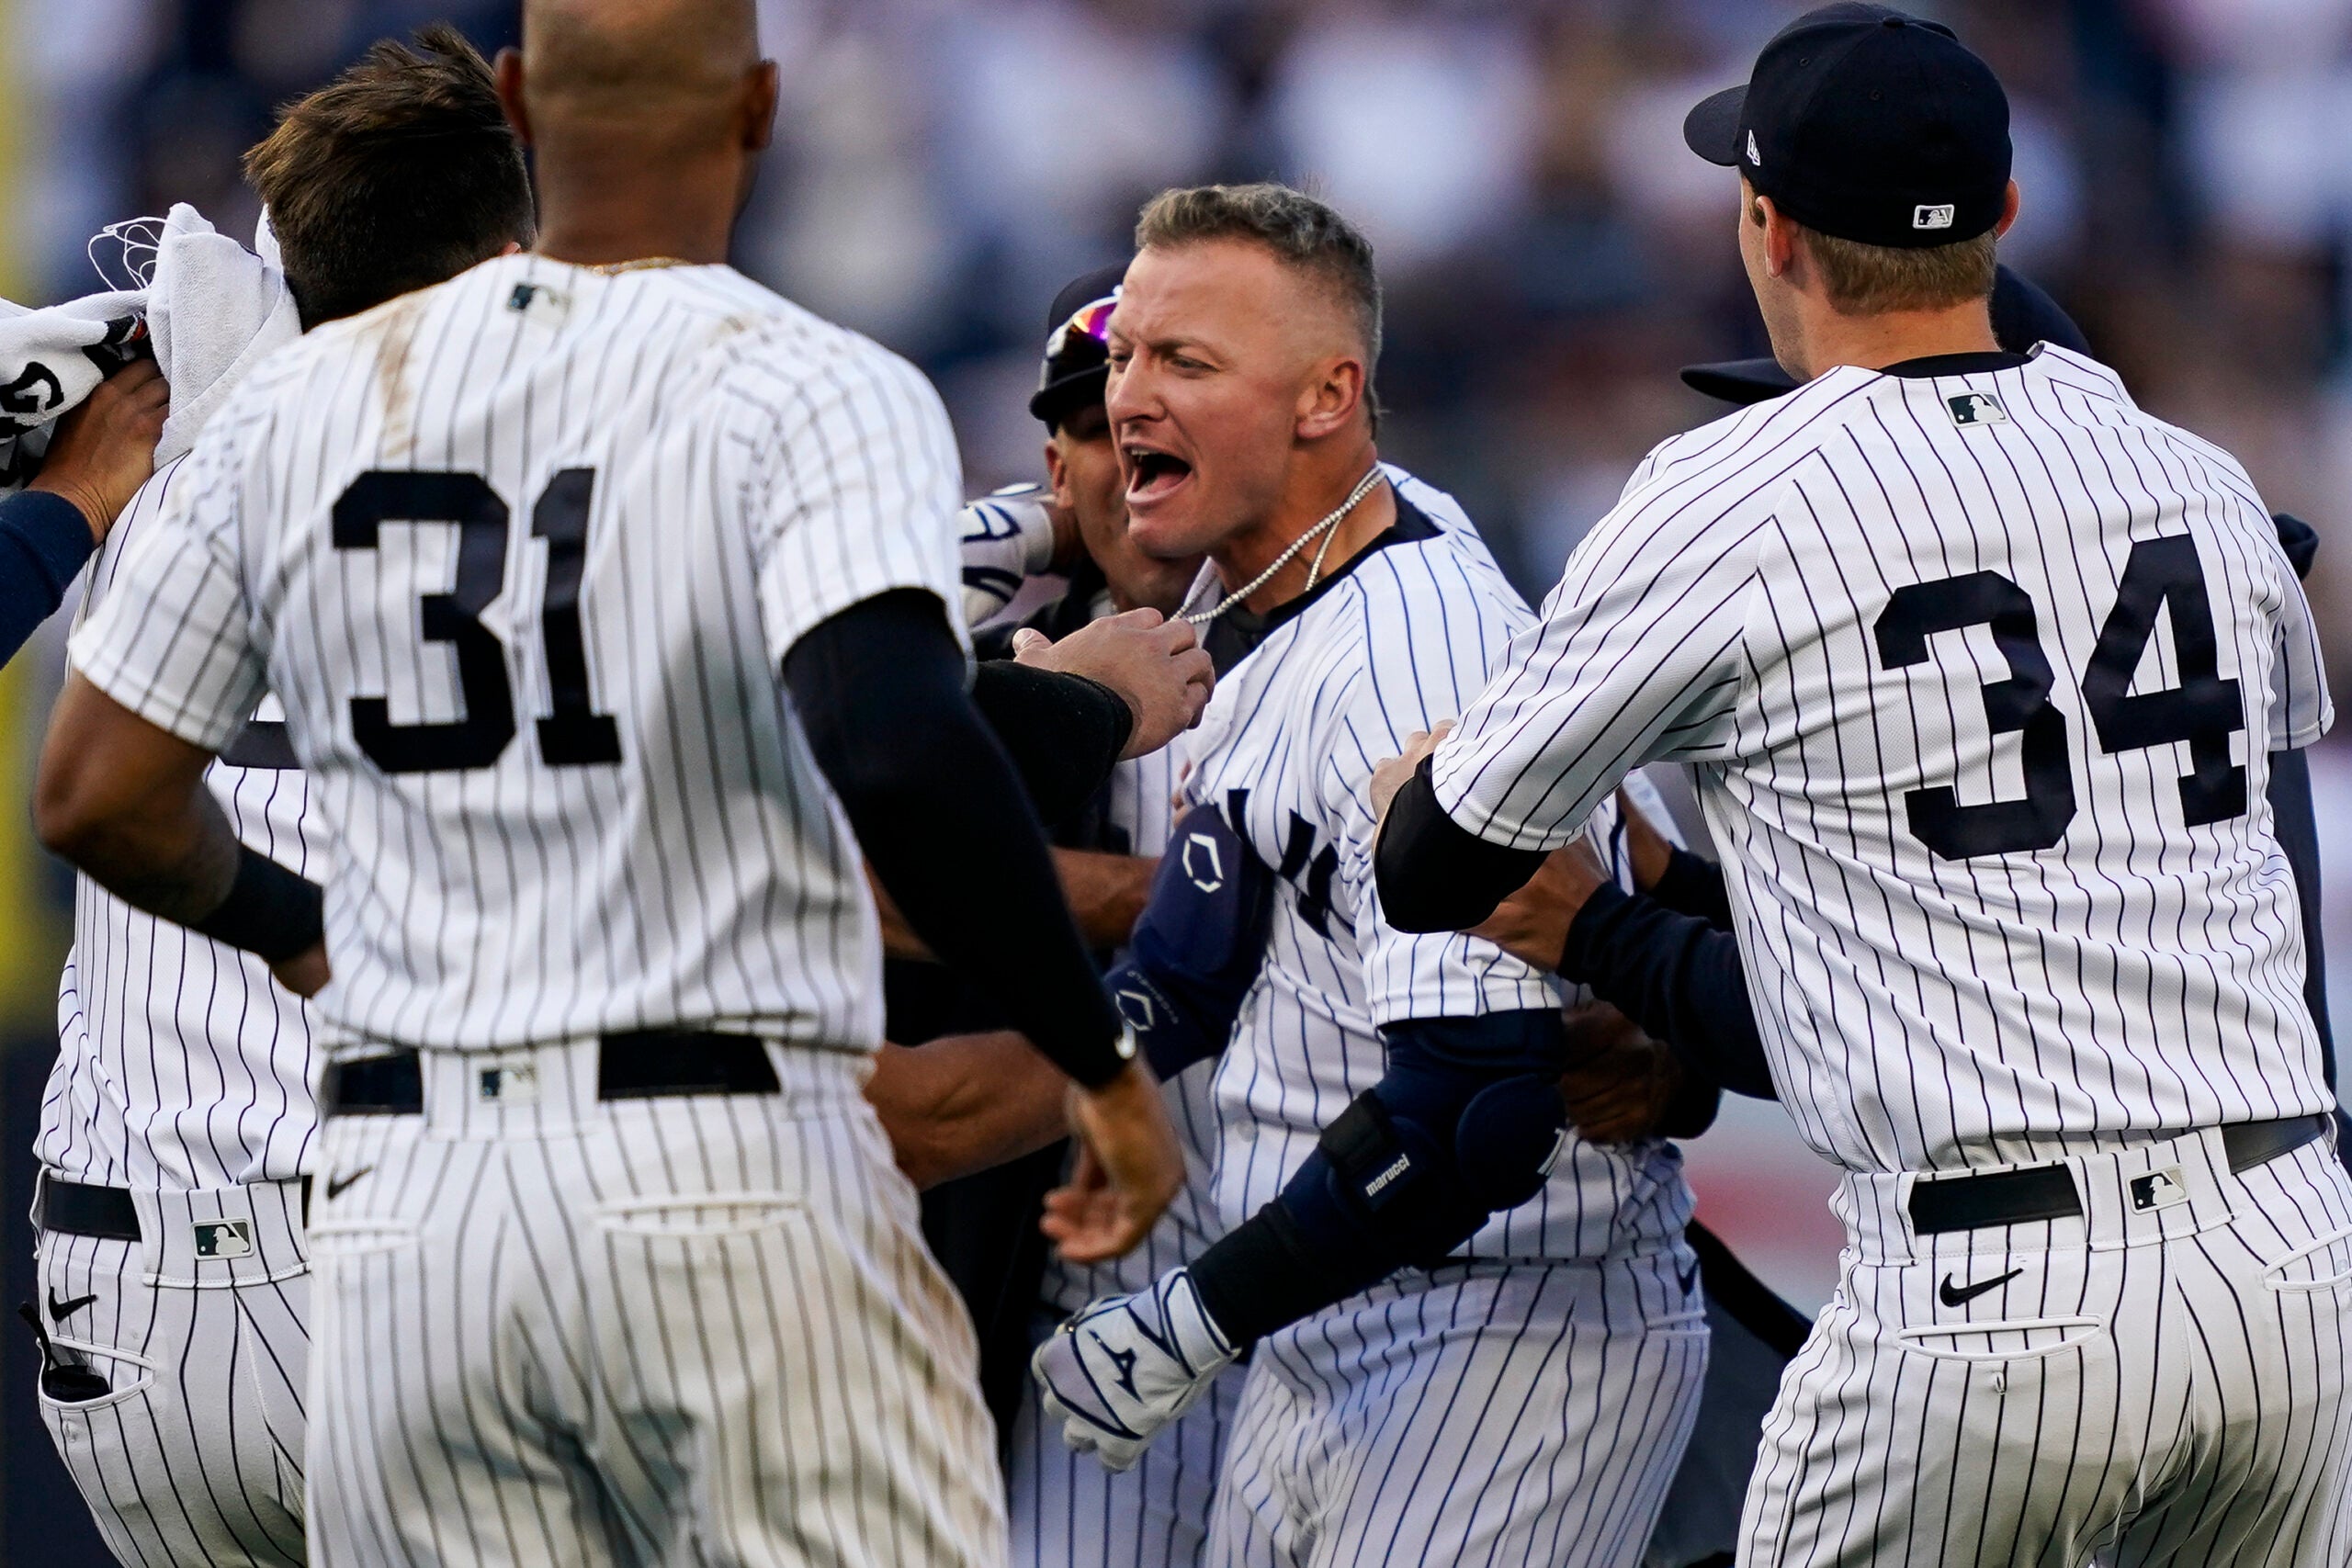 New York Yankees add insurance company logo patch to iconic uniforms